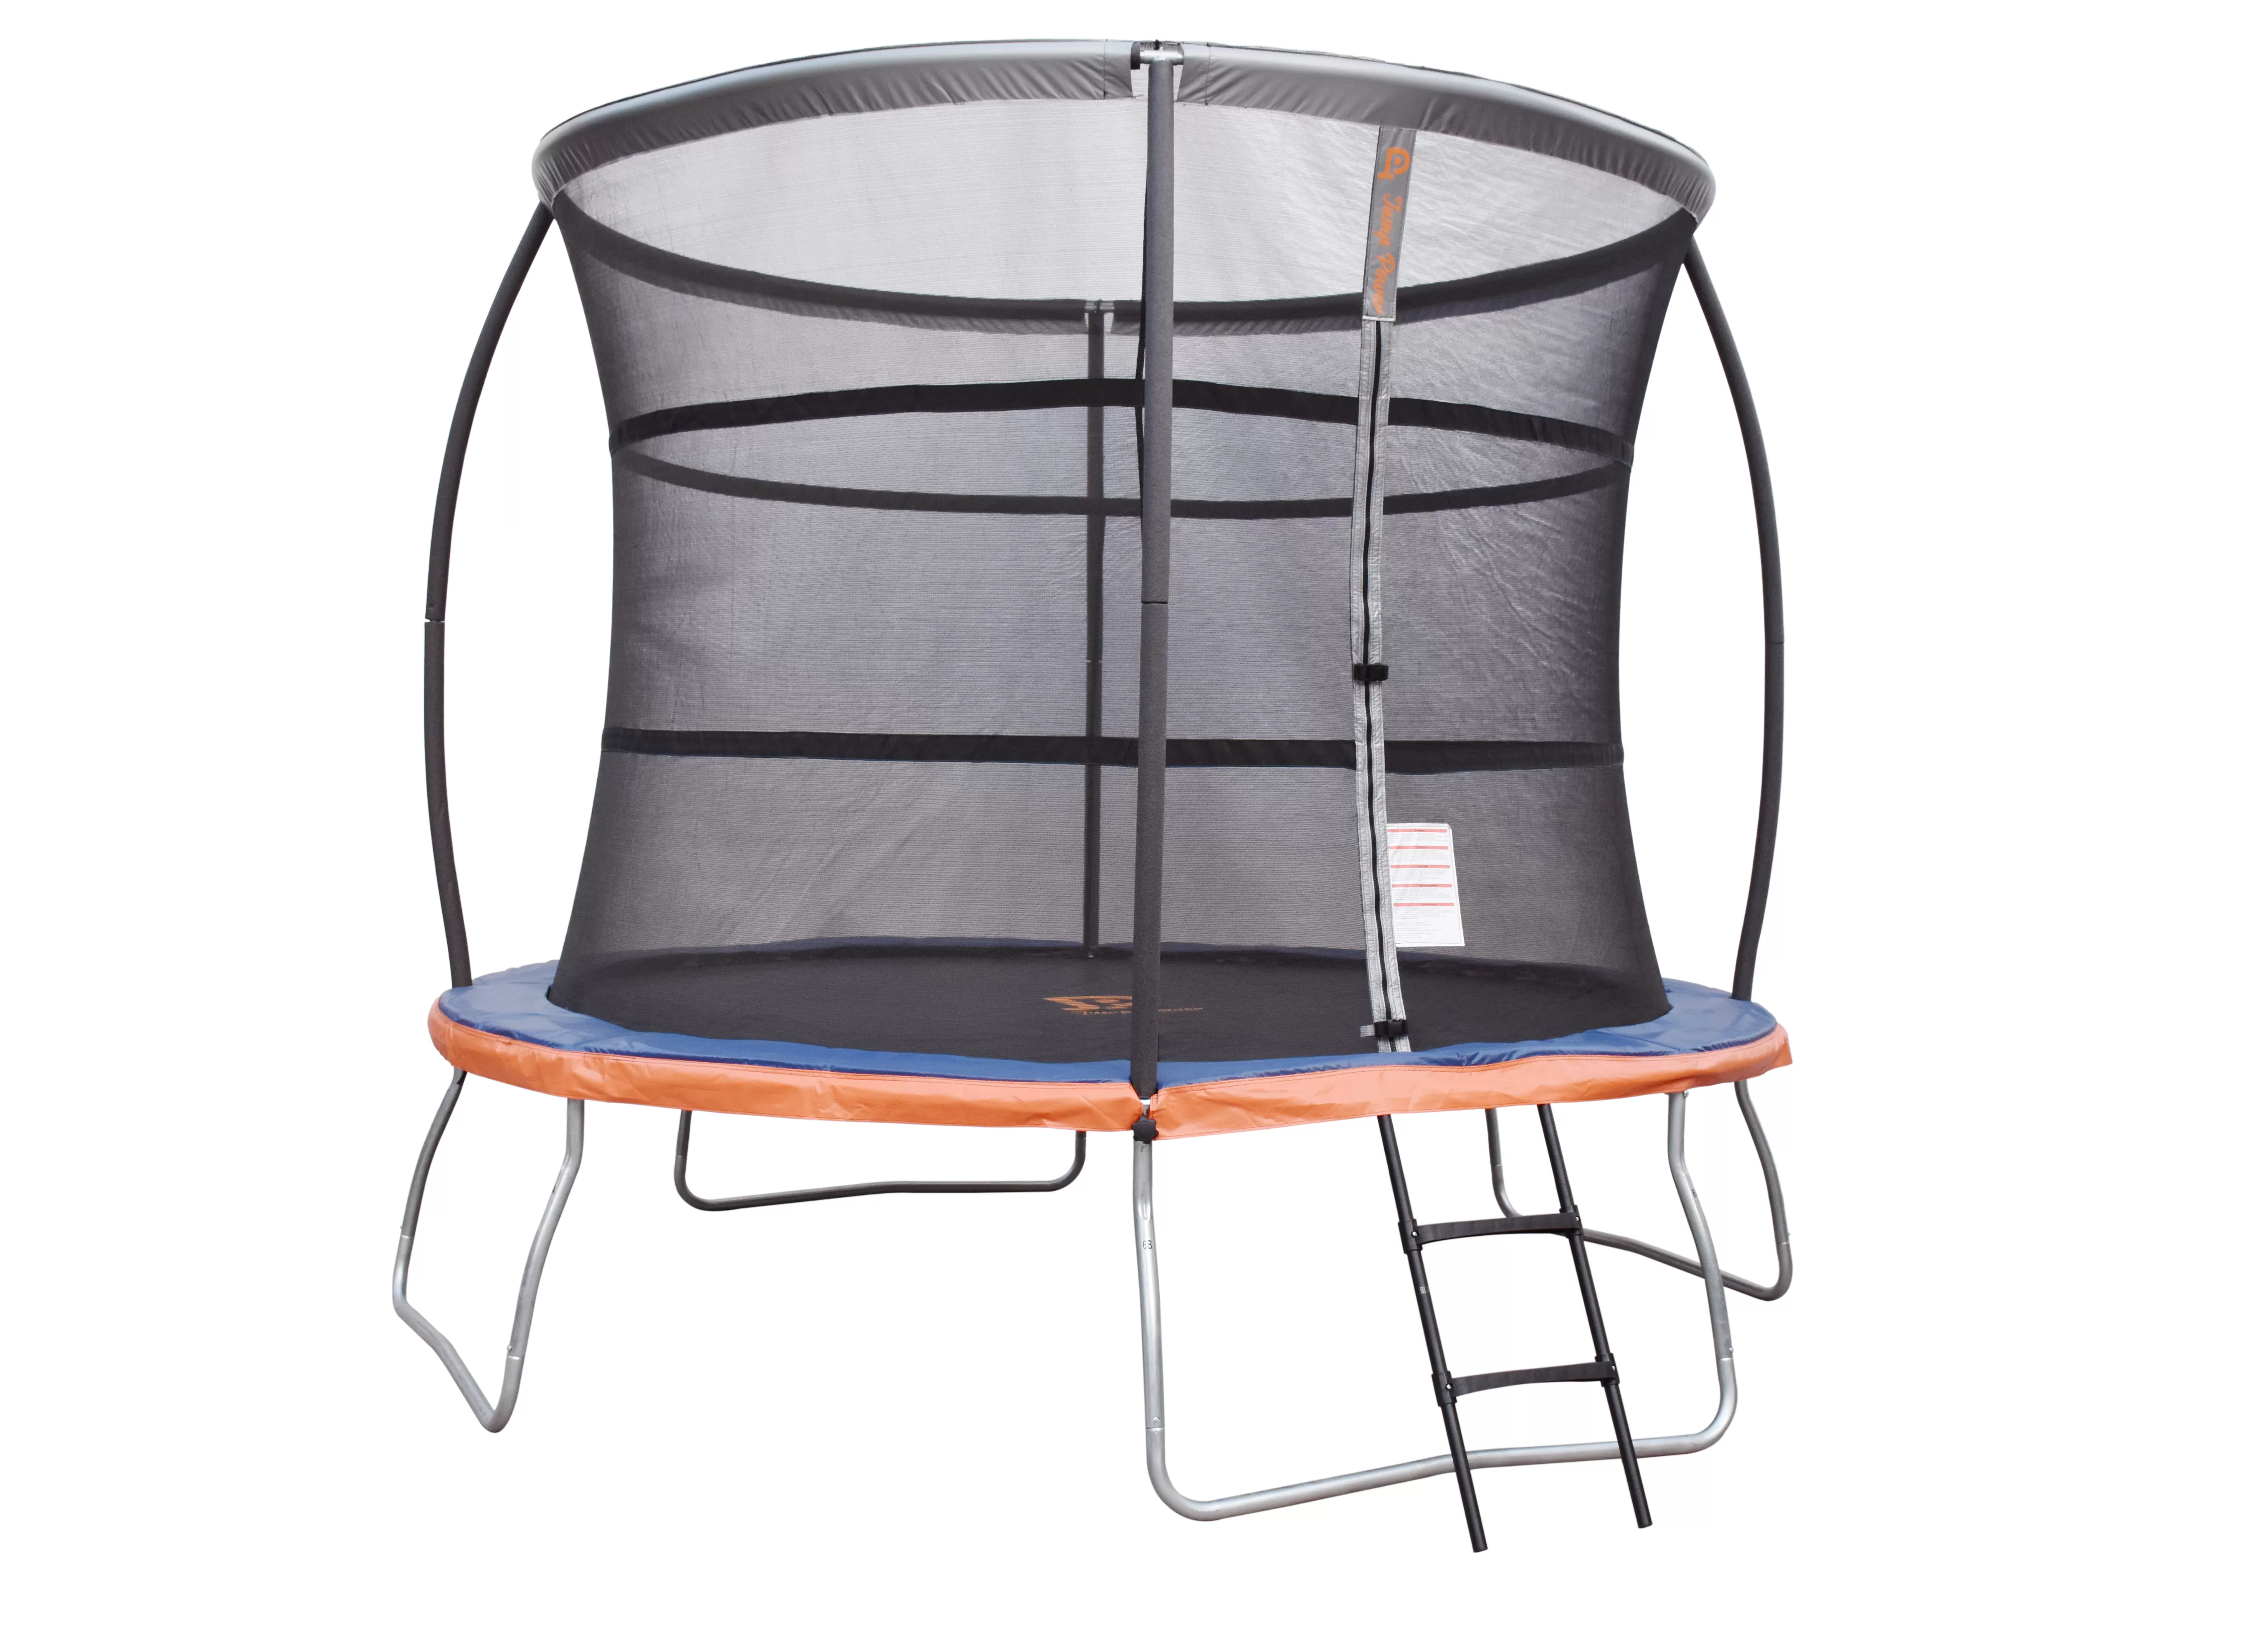 10ft trampoline with ladder